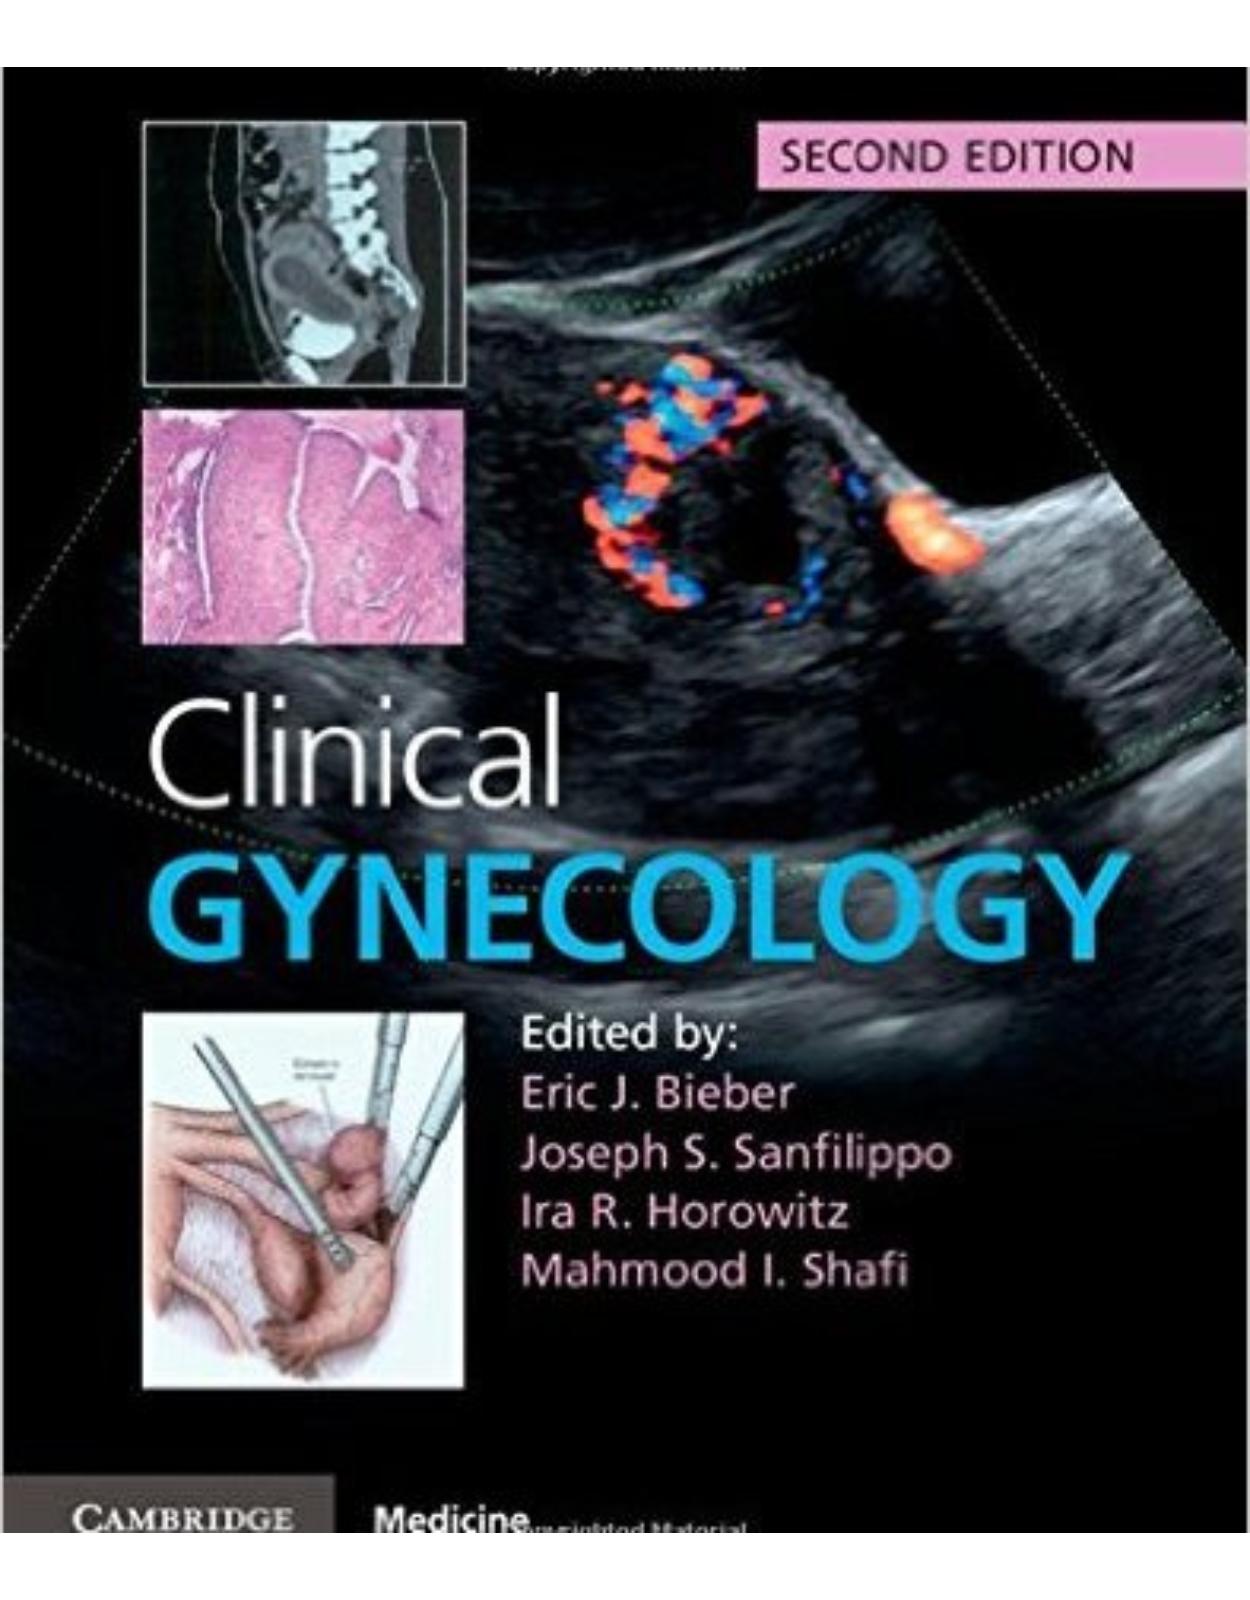 Clinical Gynecology 2nd Edition